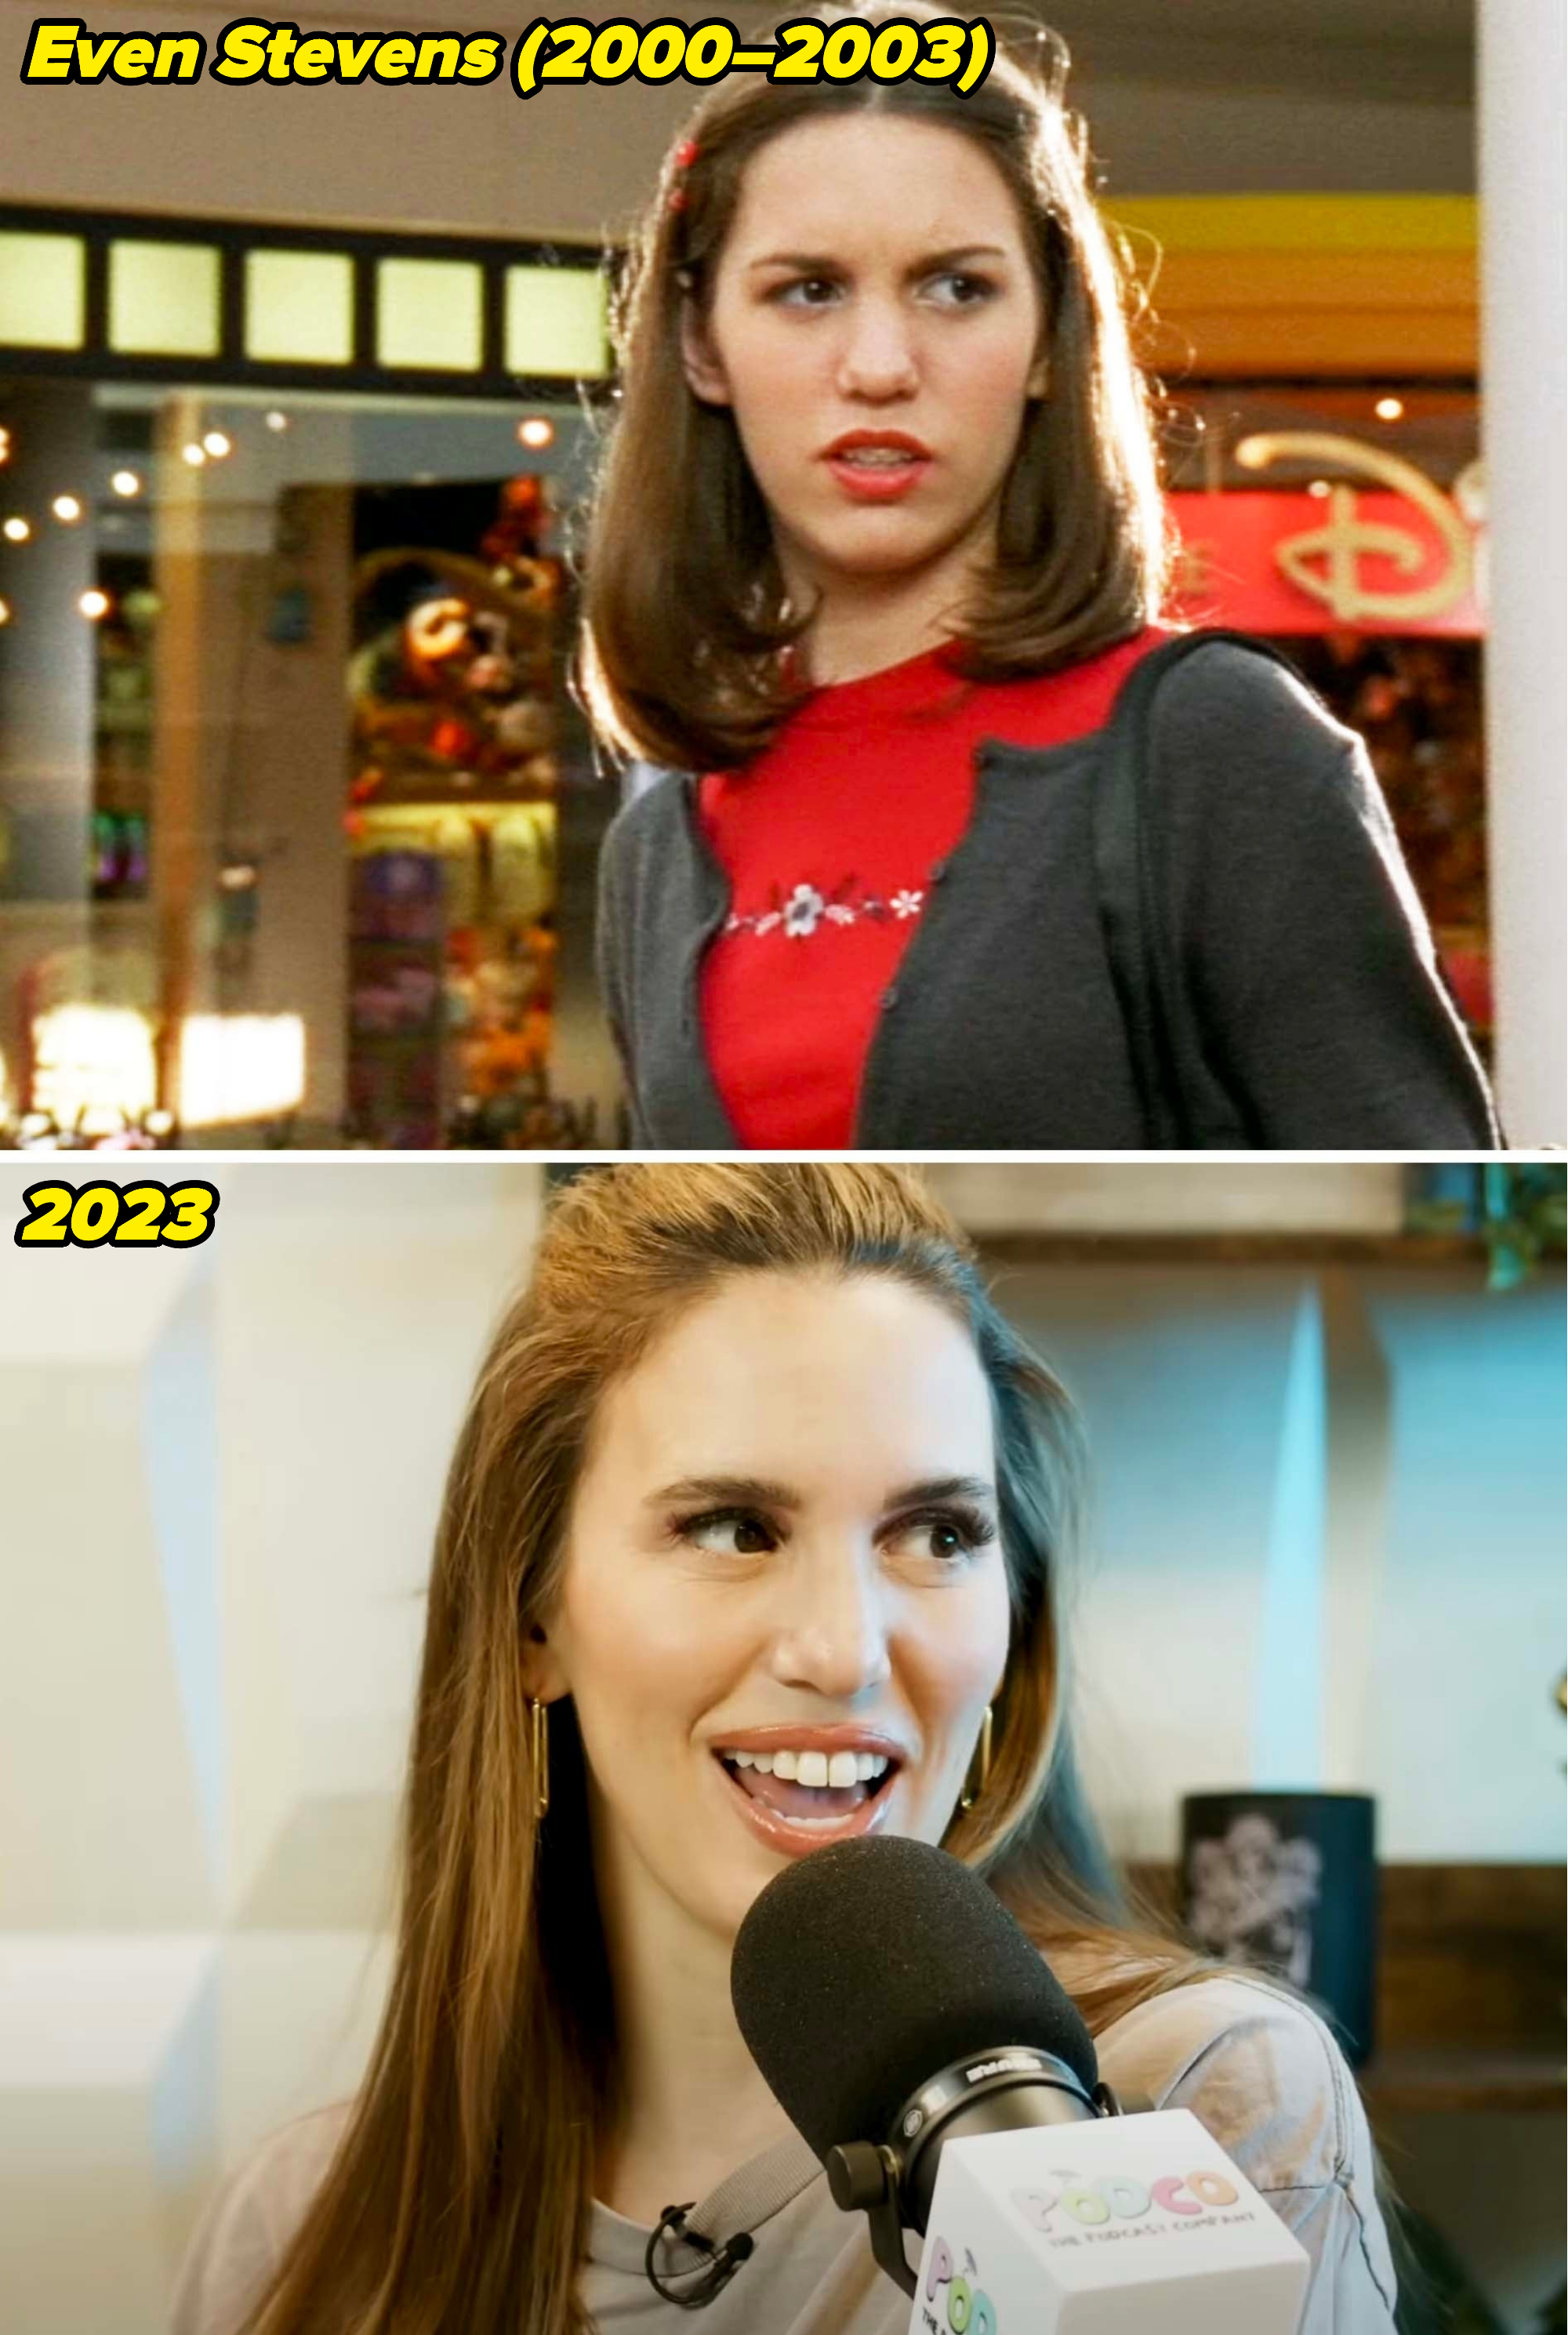 Christy on Even Stevens from 2000–2003 and speaking into a microphone in 2023